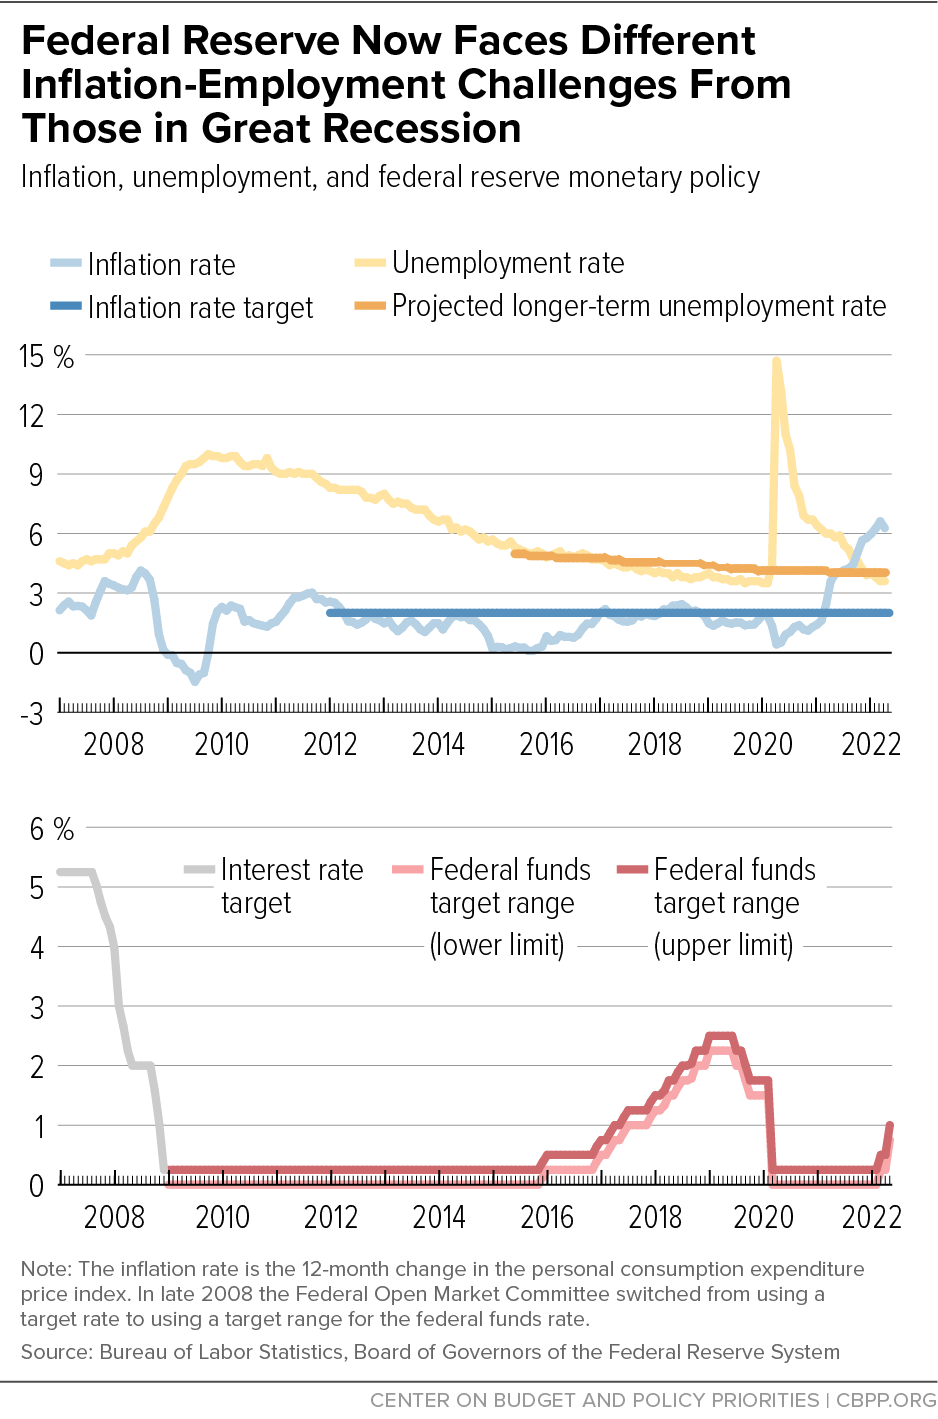 Federal Reserve Now Faces Different Inflation-Employment Challenges From Those in Great Recession